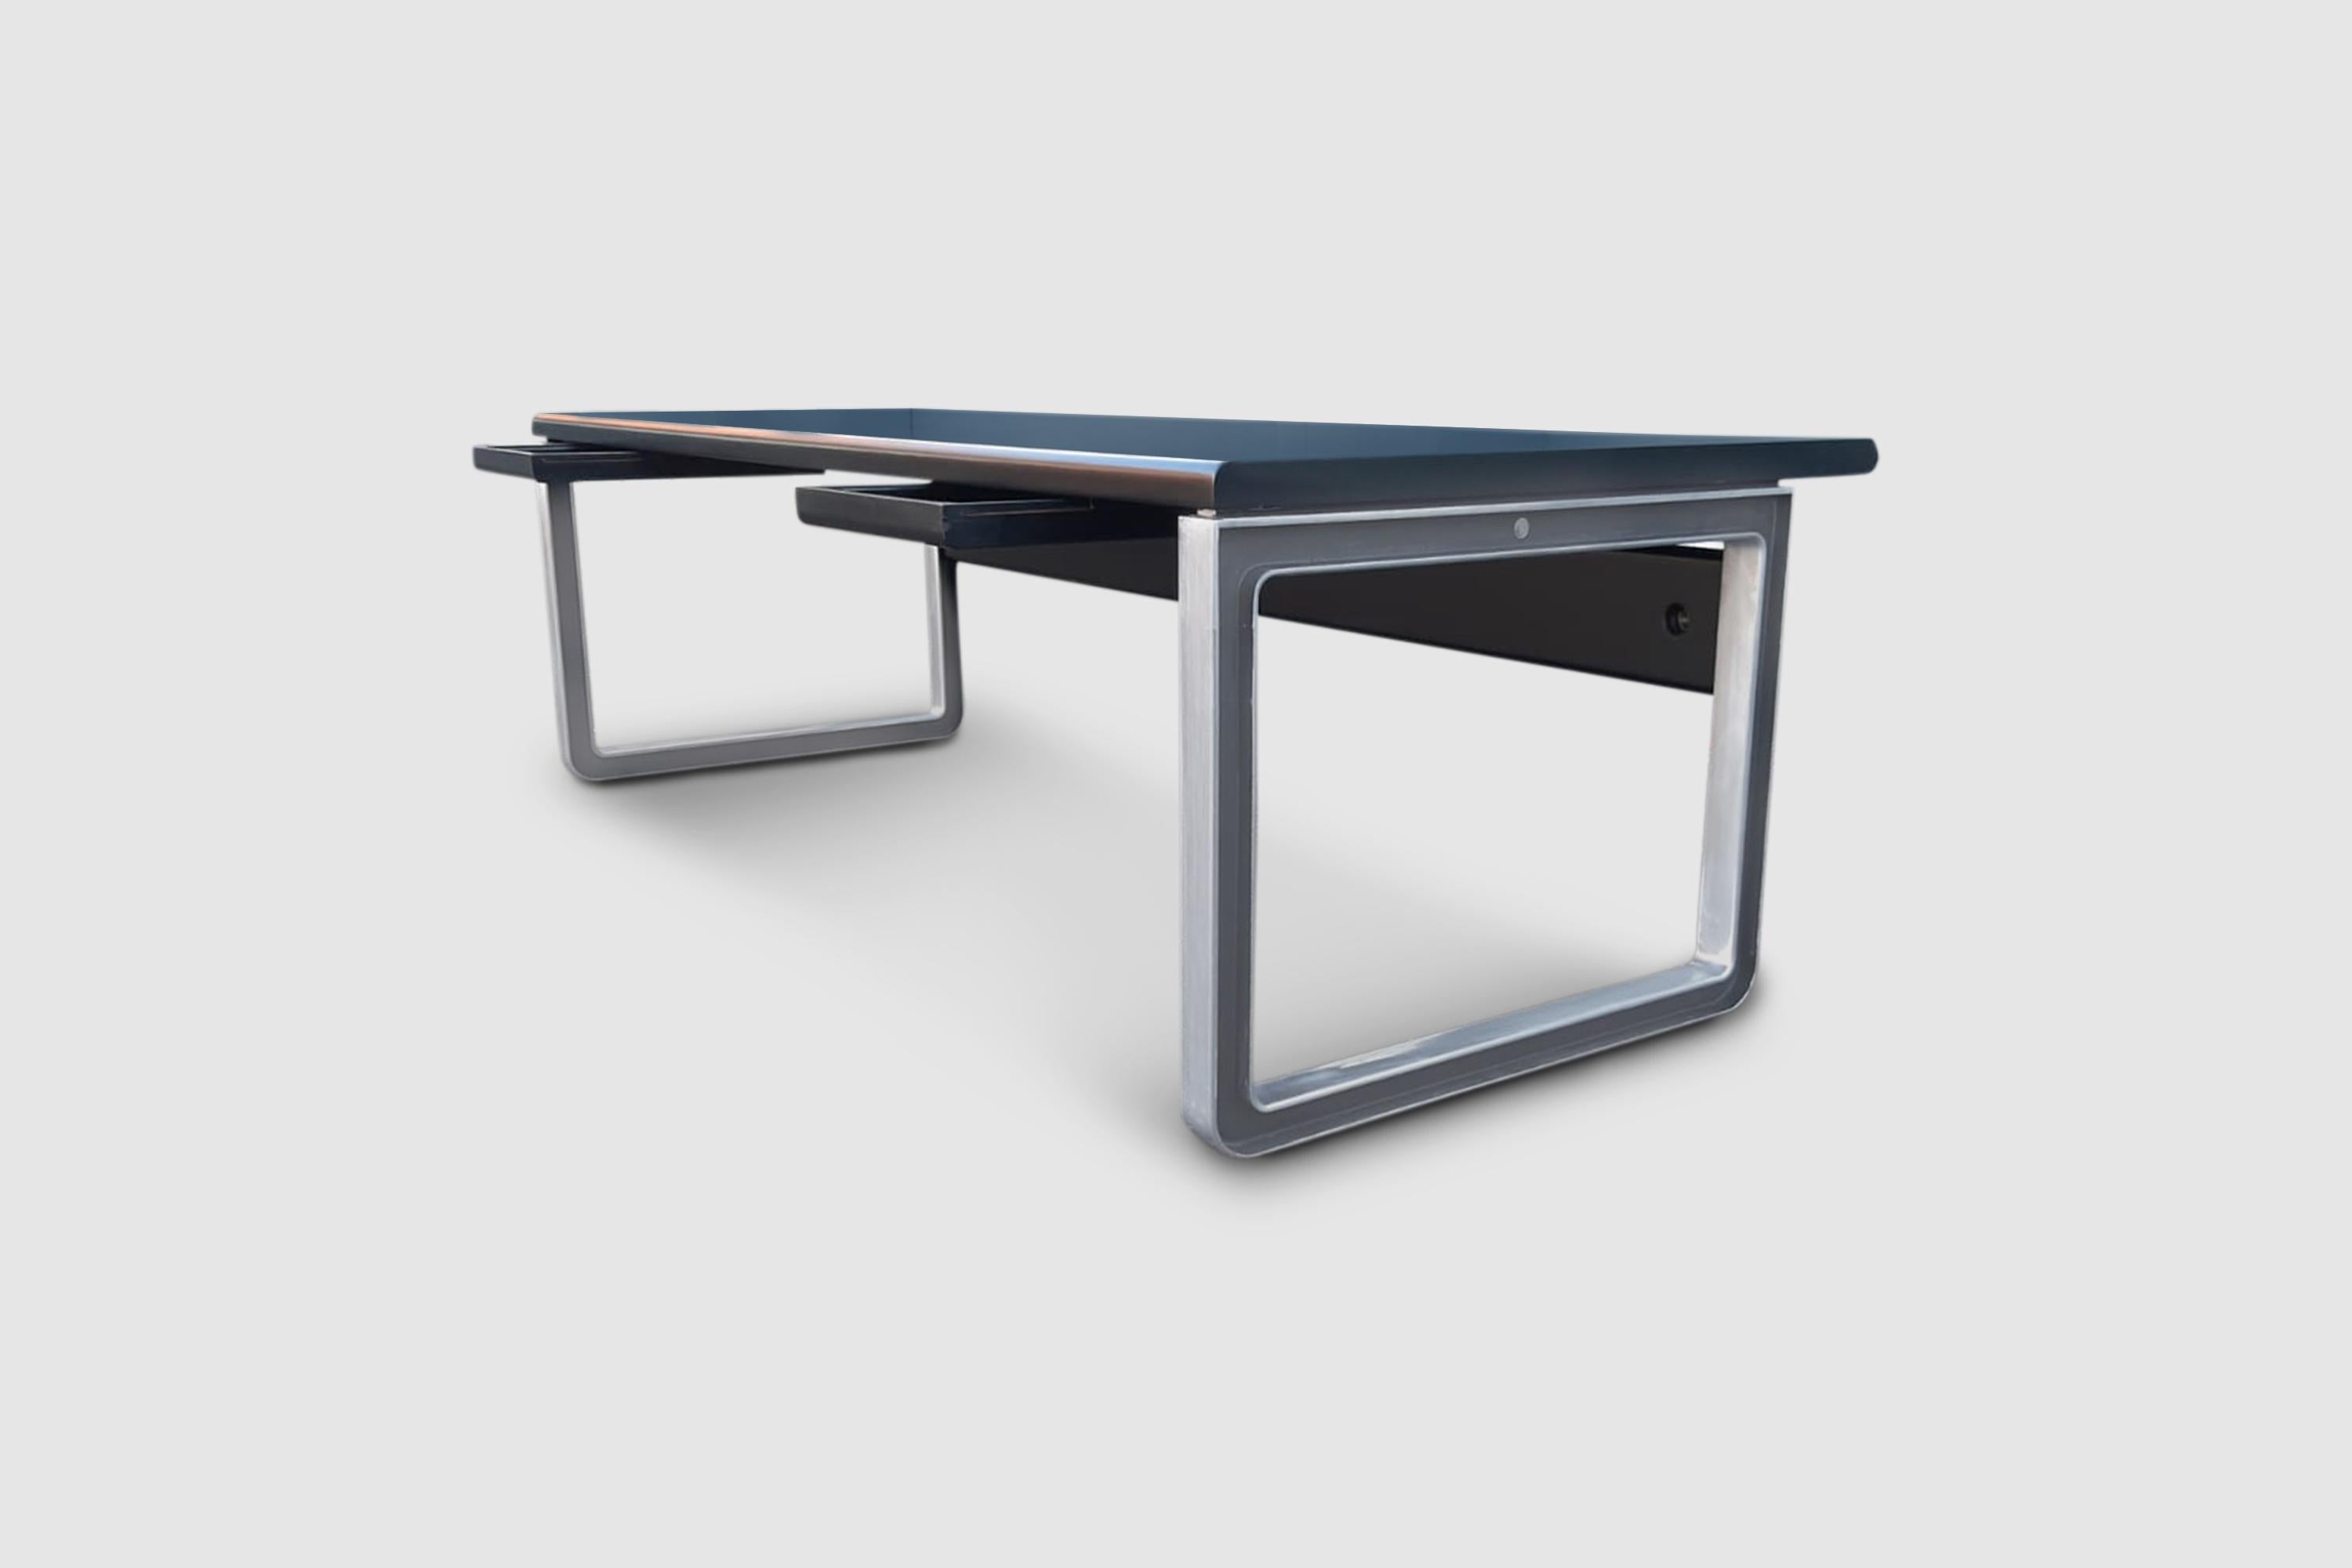 Impressive desk by Eugenio Gerli and Osvaldo Borsani for Tecno SpA, designed in 1975 by Eugenio Gerli and Osvaldo Borsani for Tecno SpA Italy.

It is made with excellent wood and polished steel bases. The top consists of solid walnut wood covered